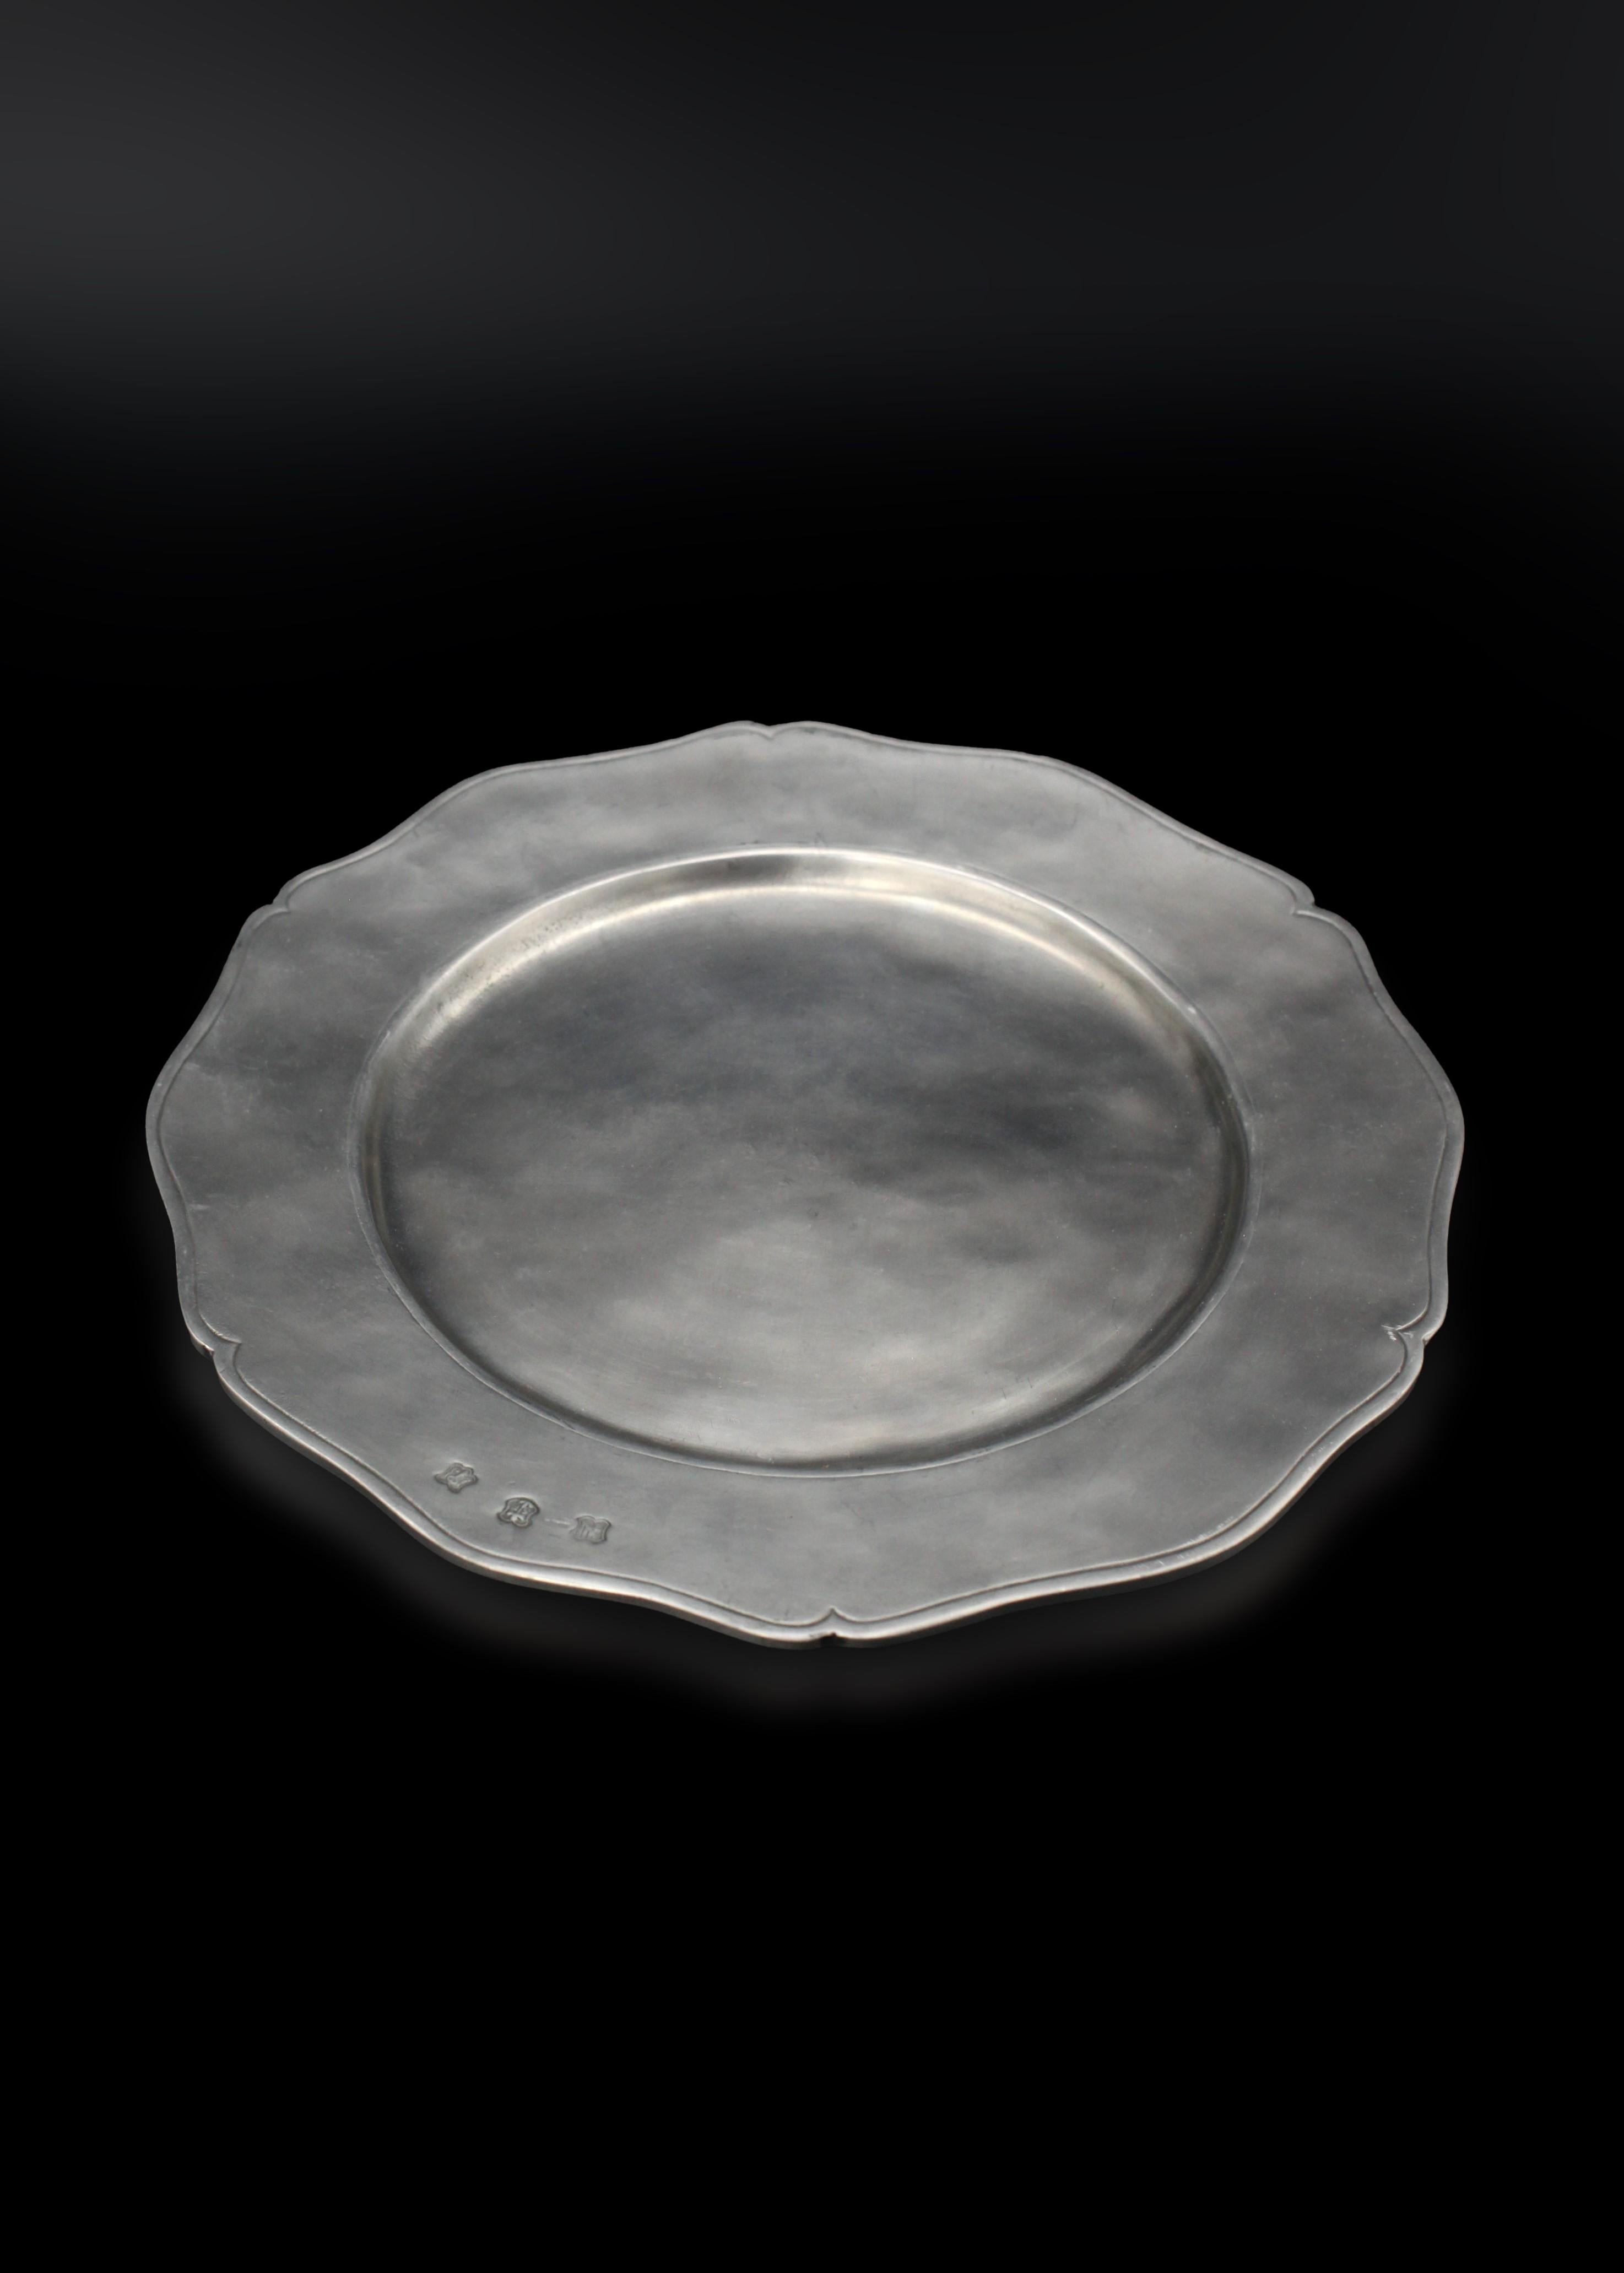 Handcrafted with the utmost artistry in the heart of Italy, this Italian Pewter Plate represents the highest degree of craftsmanship. Made from a food-safe alloy that is lead-free and FDA approved, this plate satisfies both your aesthetic and